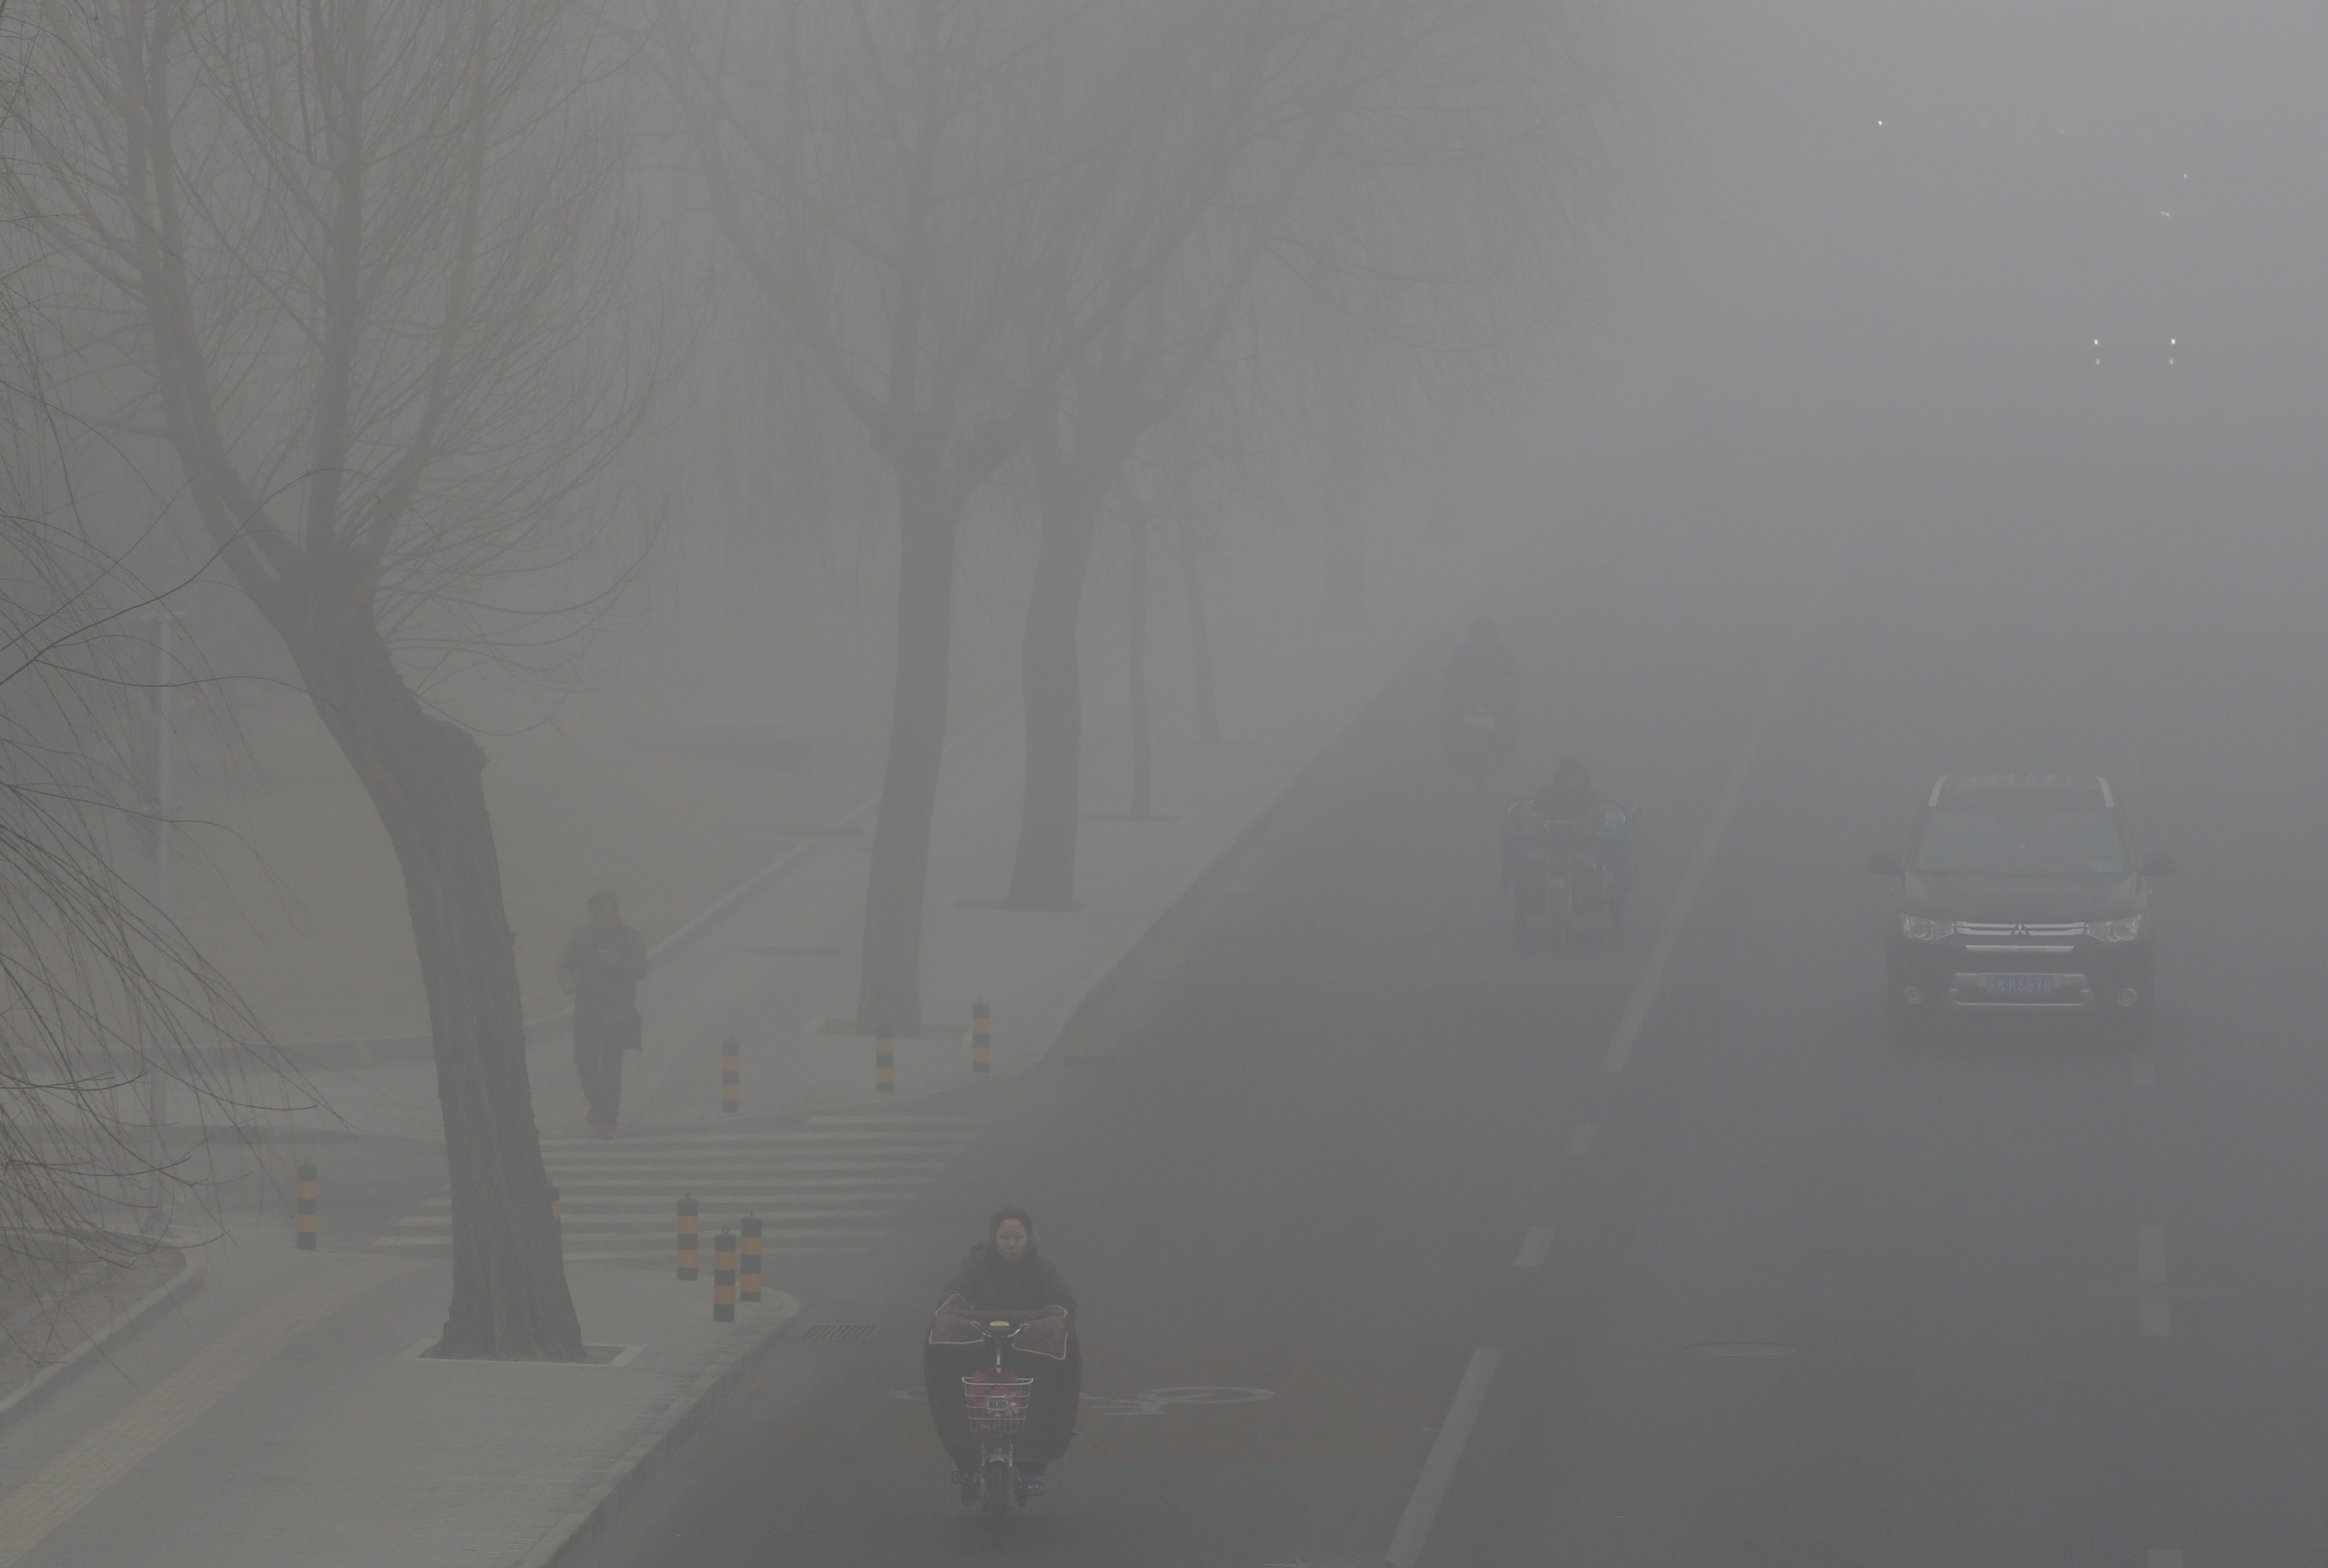 People drive and ride amid the smog in Beijing